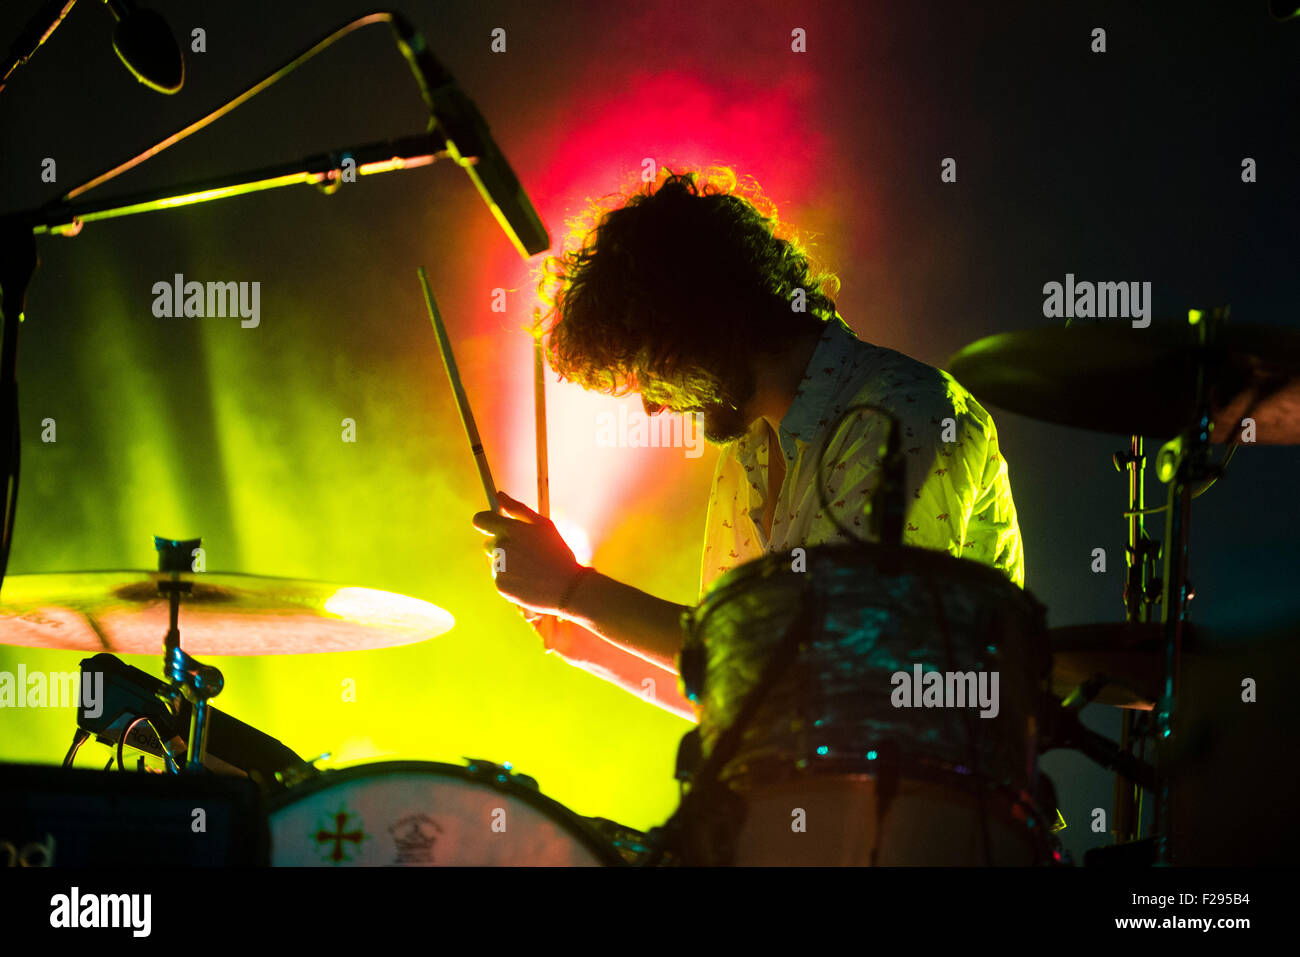 Drummer Julien Barbagallo of the band Tame Impala performs on stage at the Lollapalooza Festival on the grounds of the former Tempelhof airport in Berlin, Germany, 13 September 2015. Photo: Gregor Fischer/dpa Stock Photo